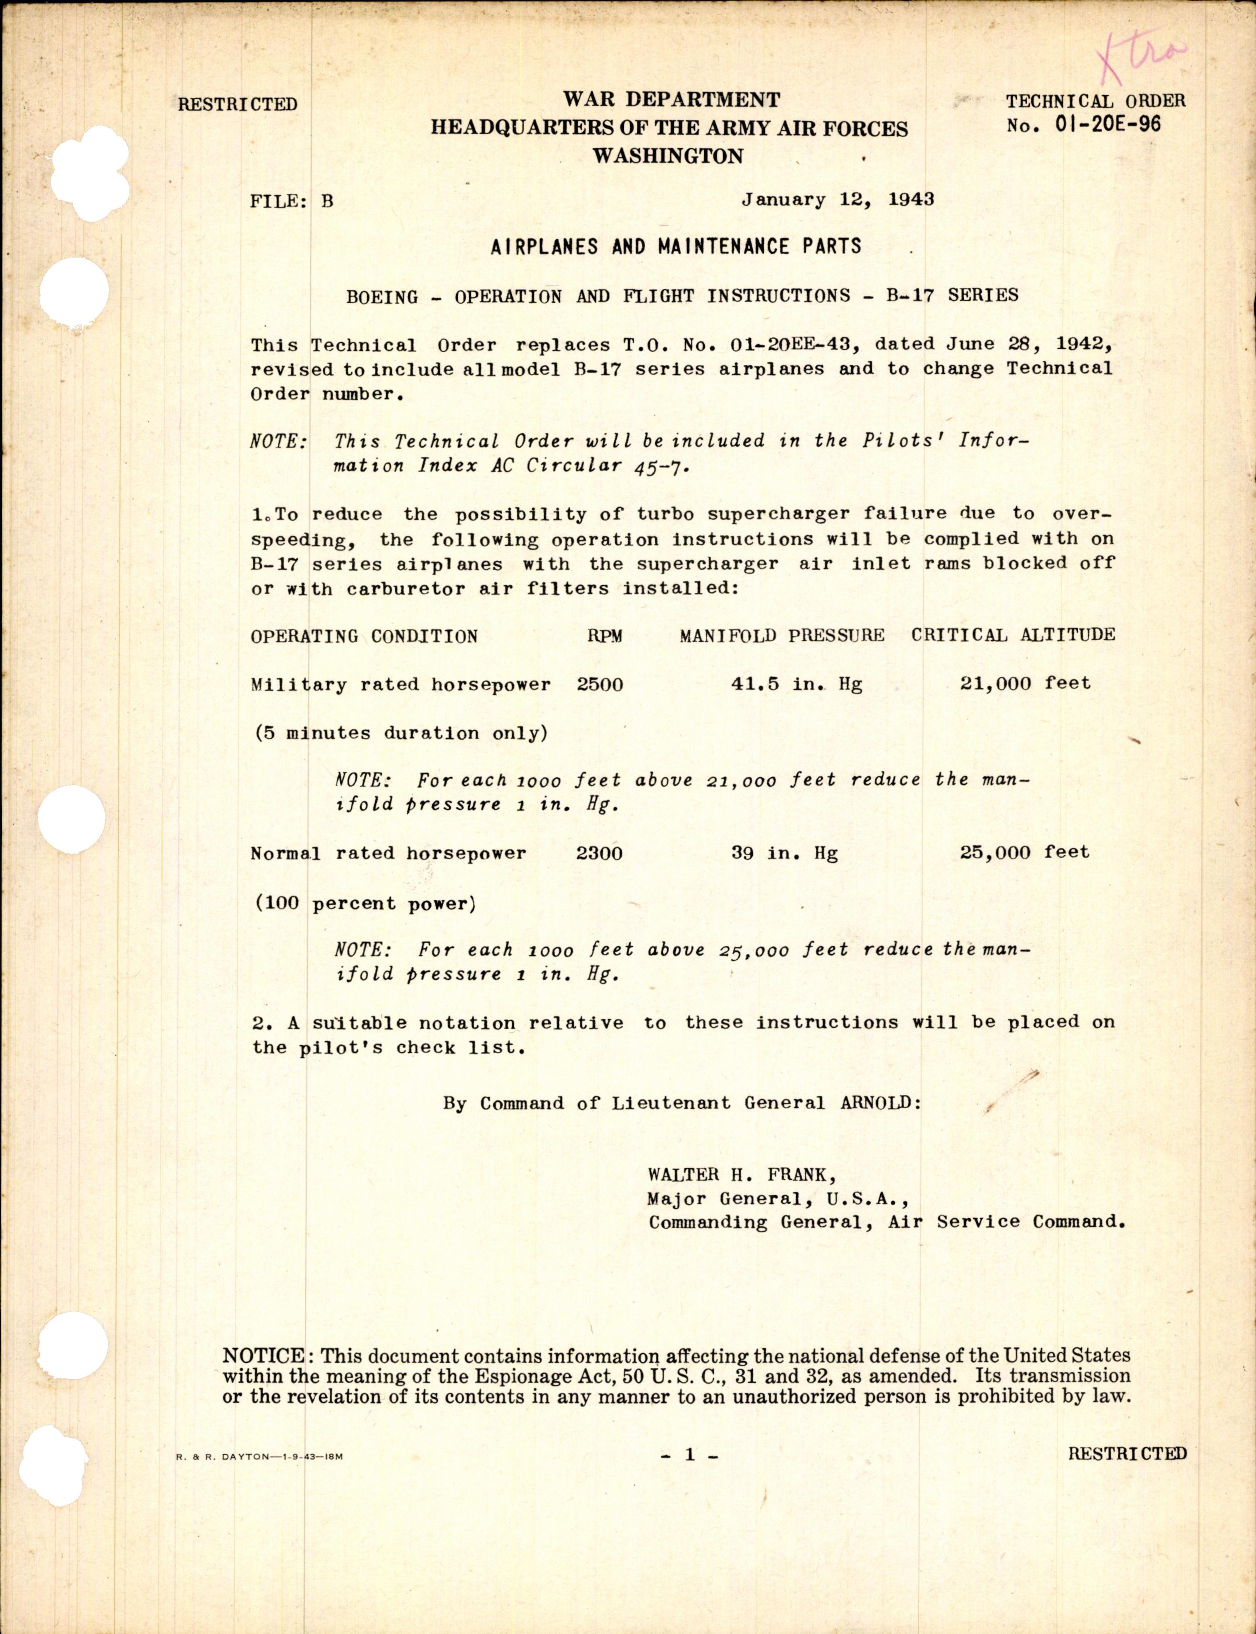 Sample page 1 from AirCorps Library document: Operation and Flight Instruction for B-17 Series